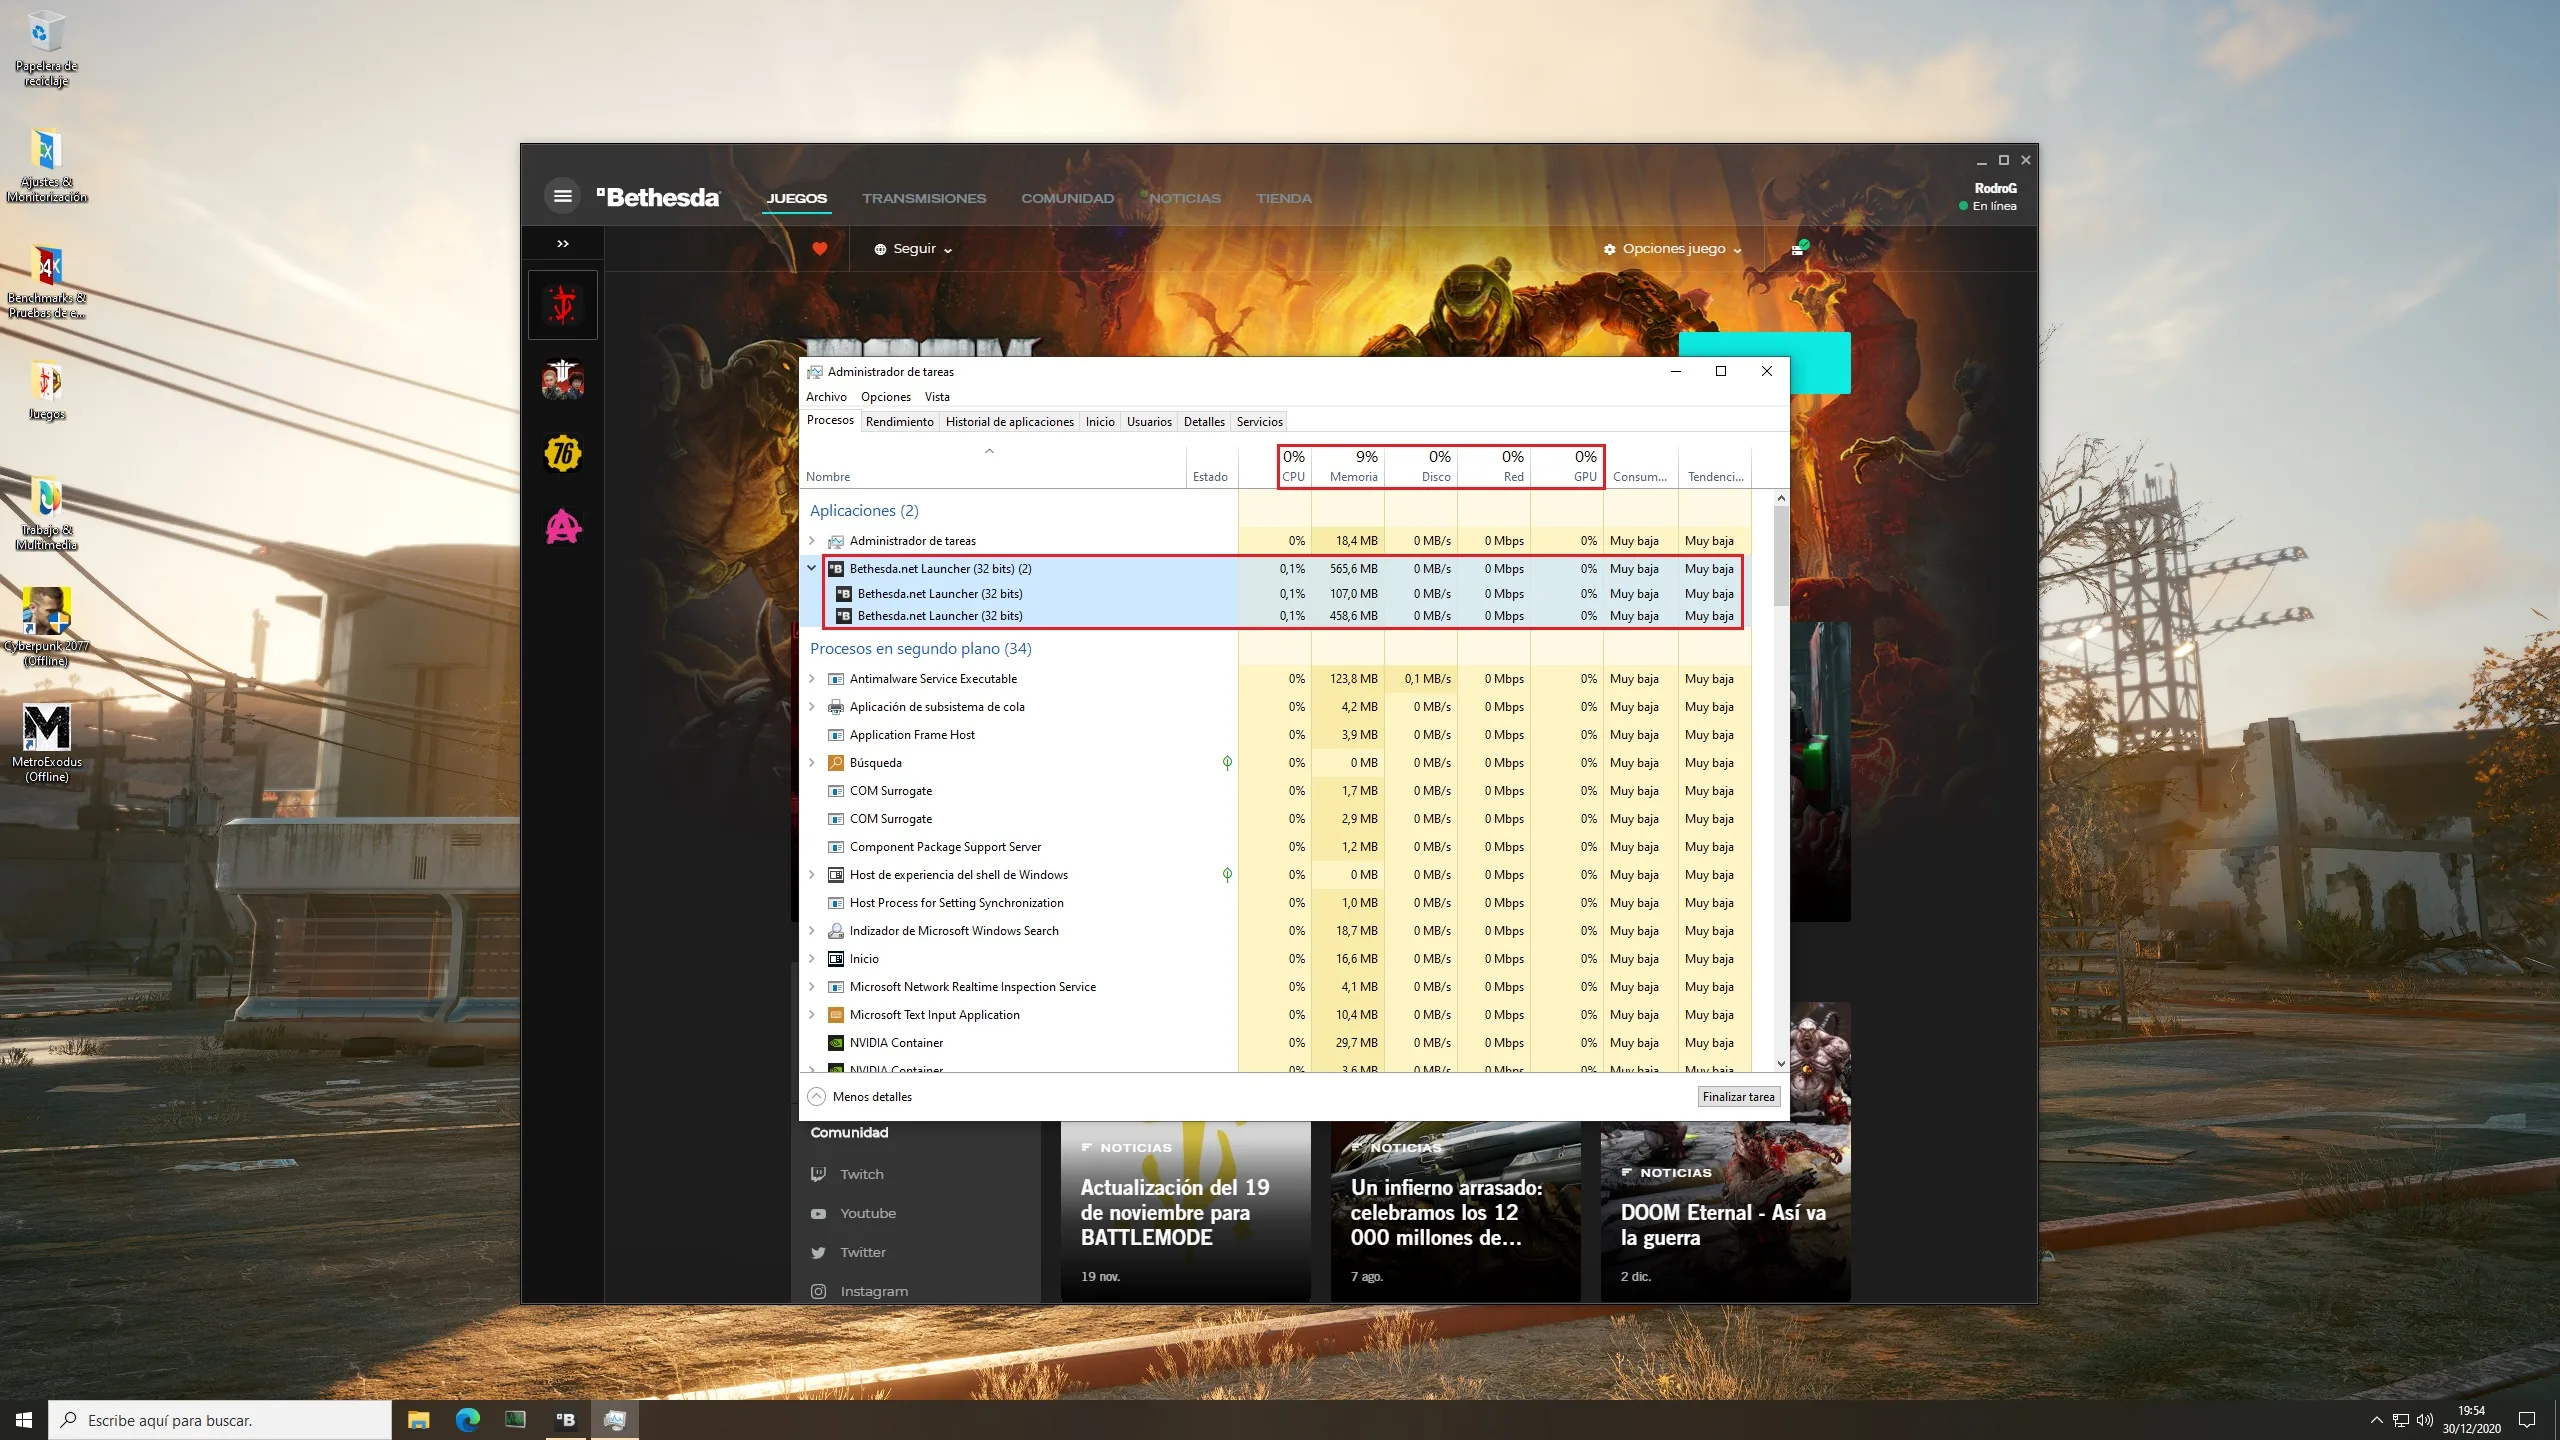 PC Game Launchers Efficiency – Epic Games Launcher on static load state – Windows 10 Task Manager Processes Tab